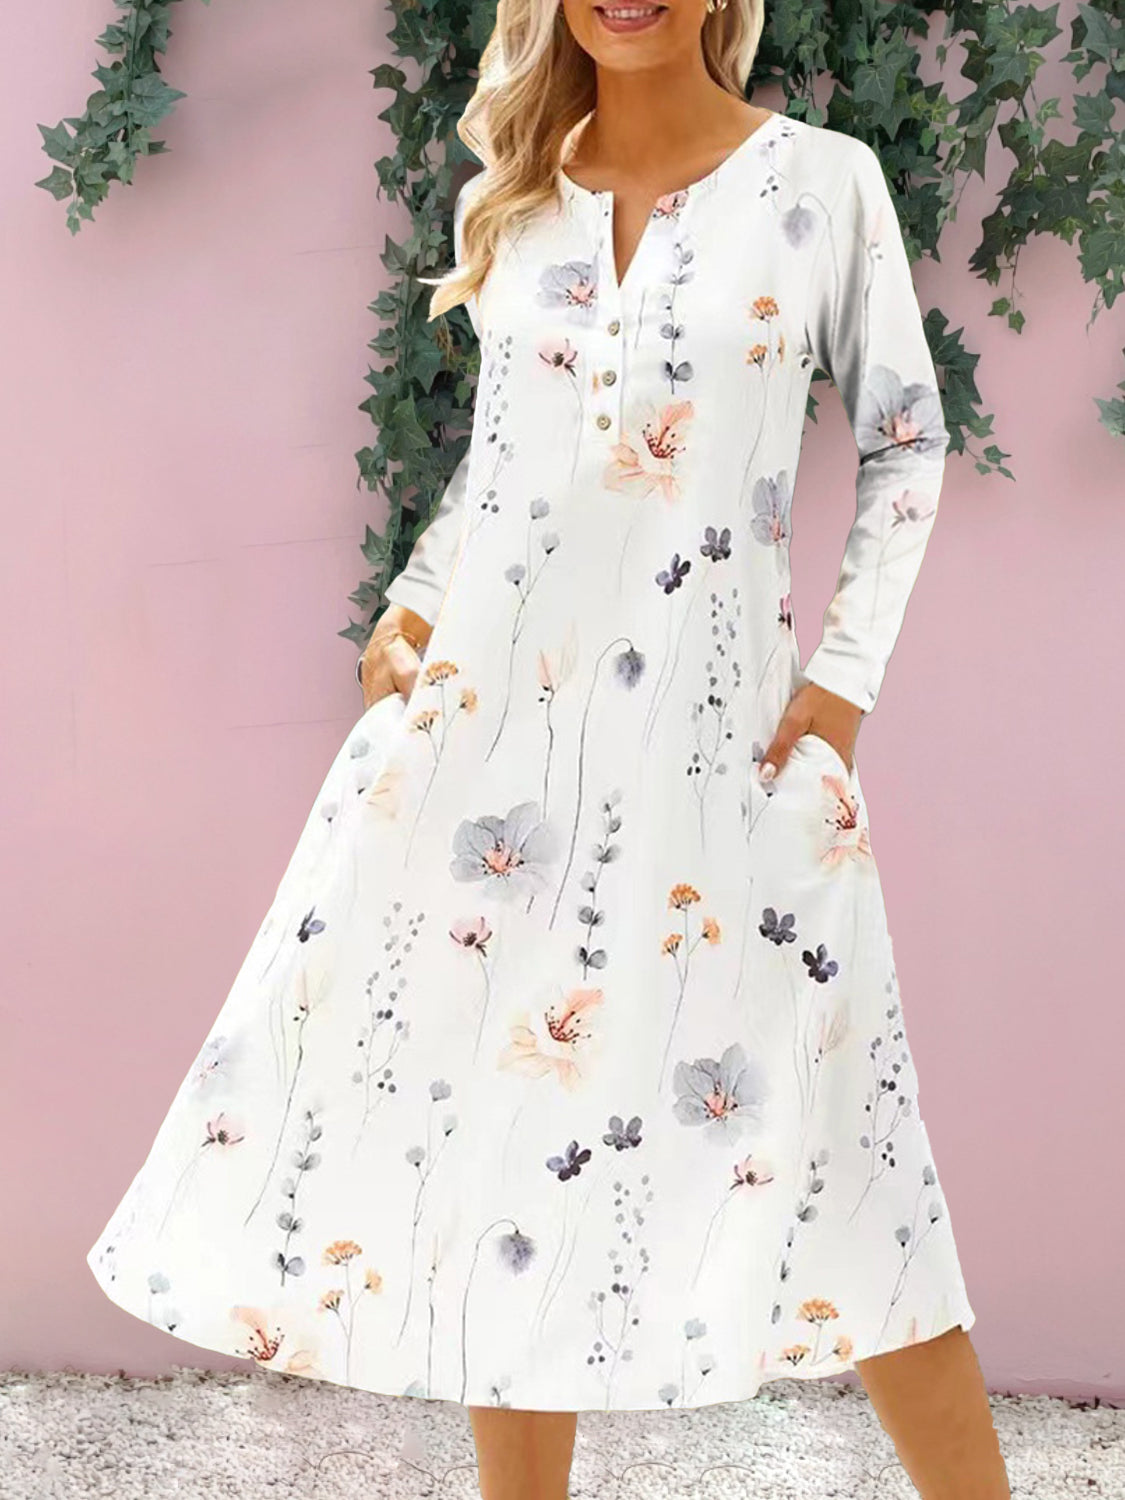 Chic Floral Midi Dress: Perfect Summer Wedding Guest Attire for Women